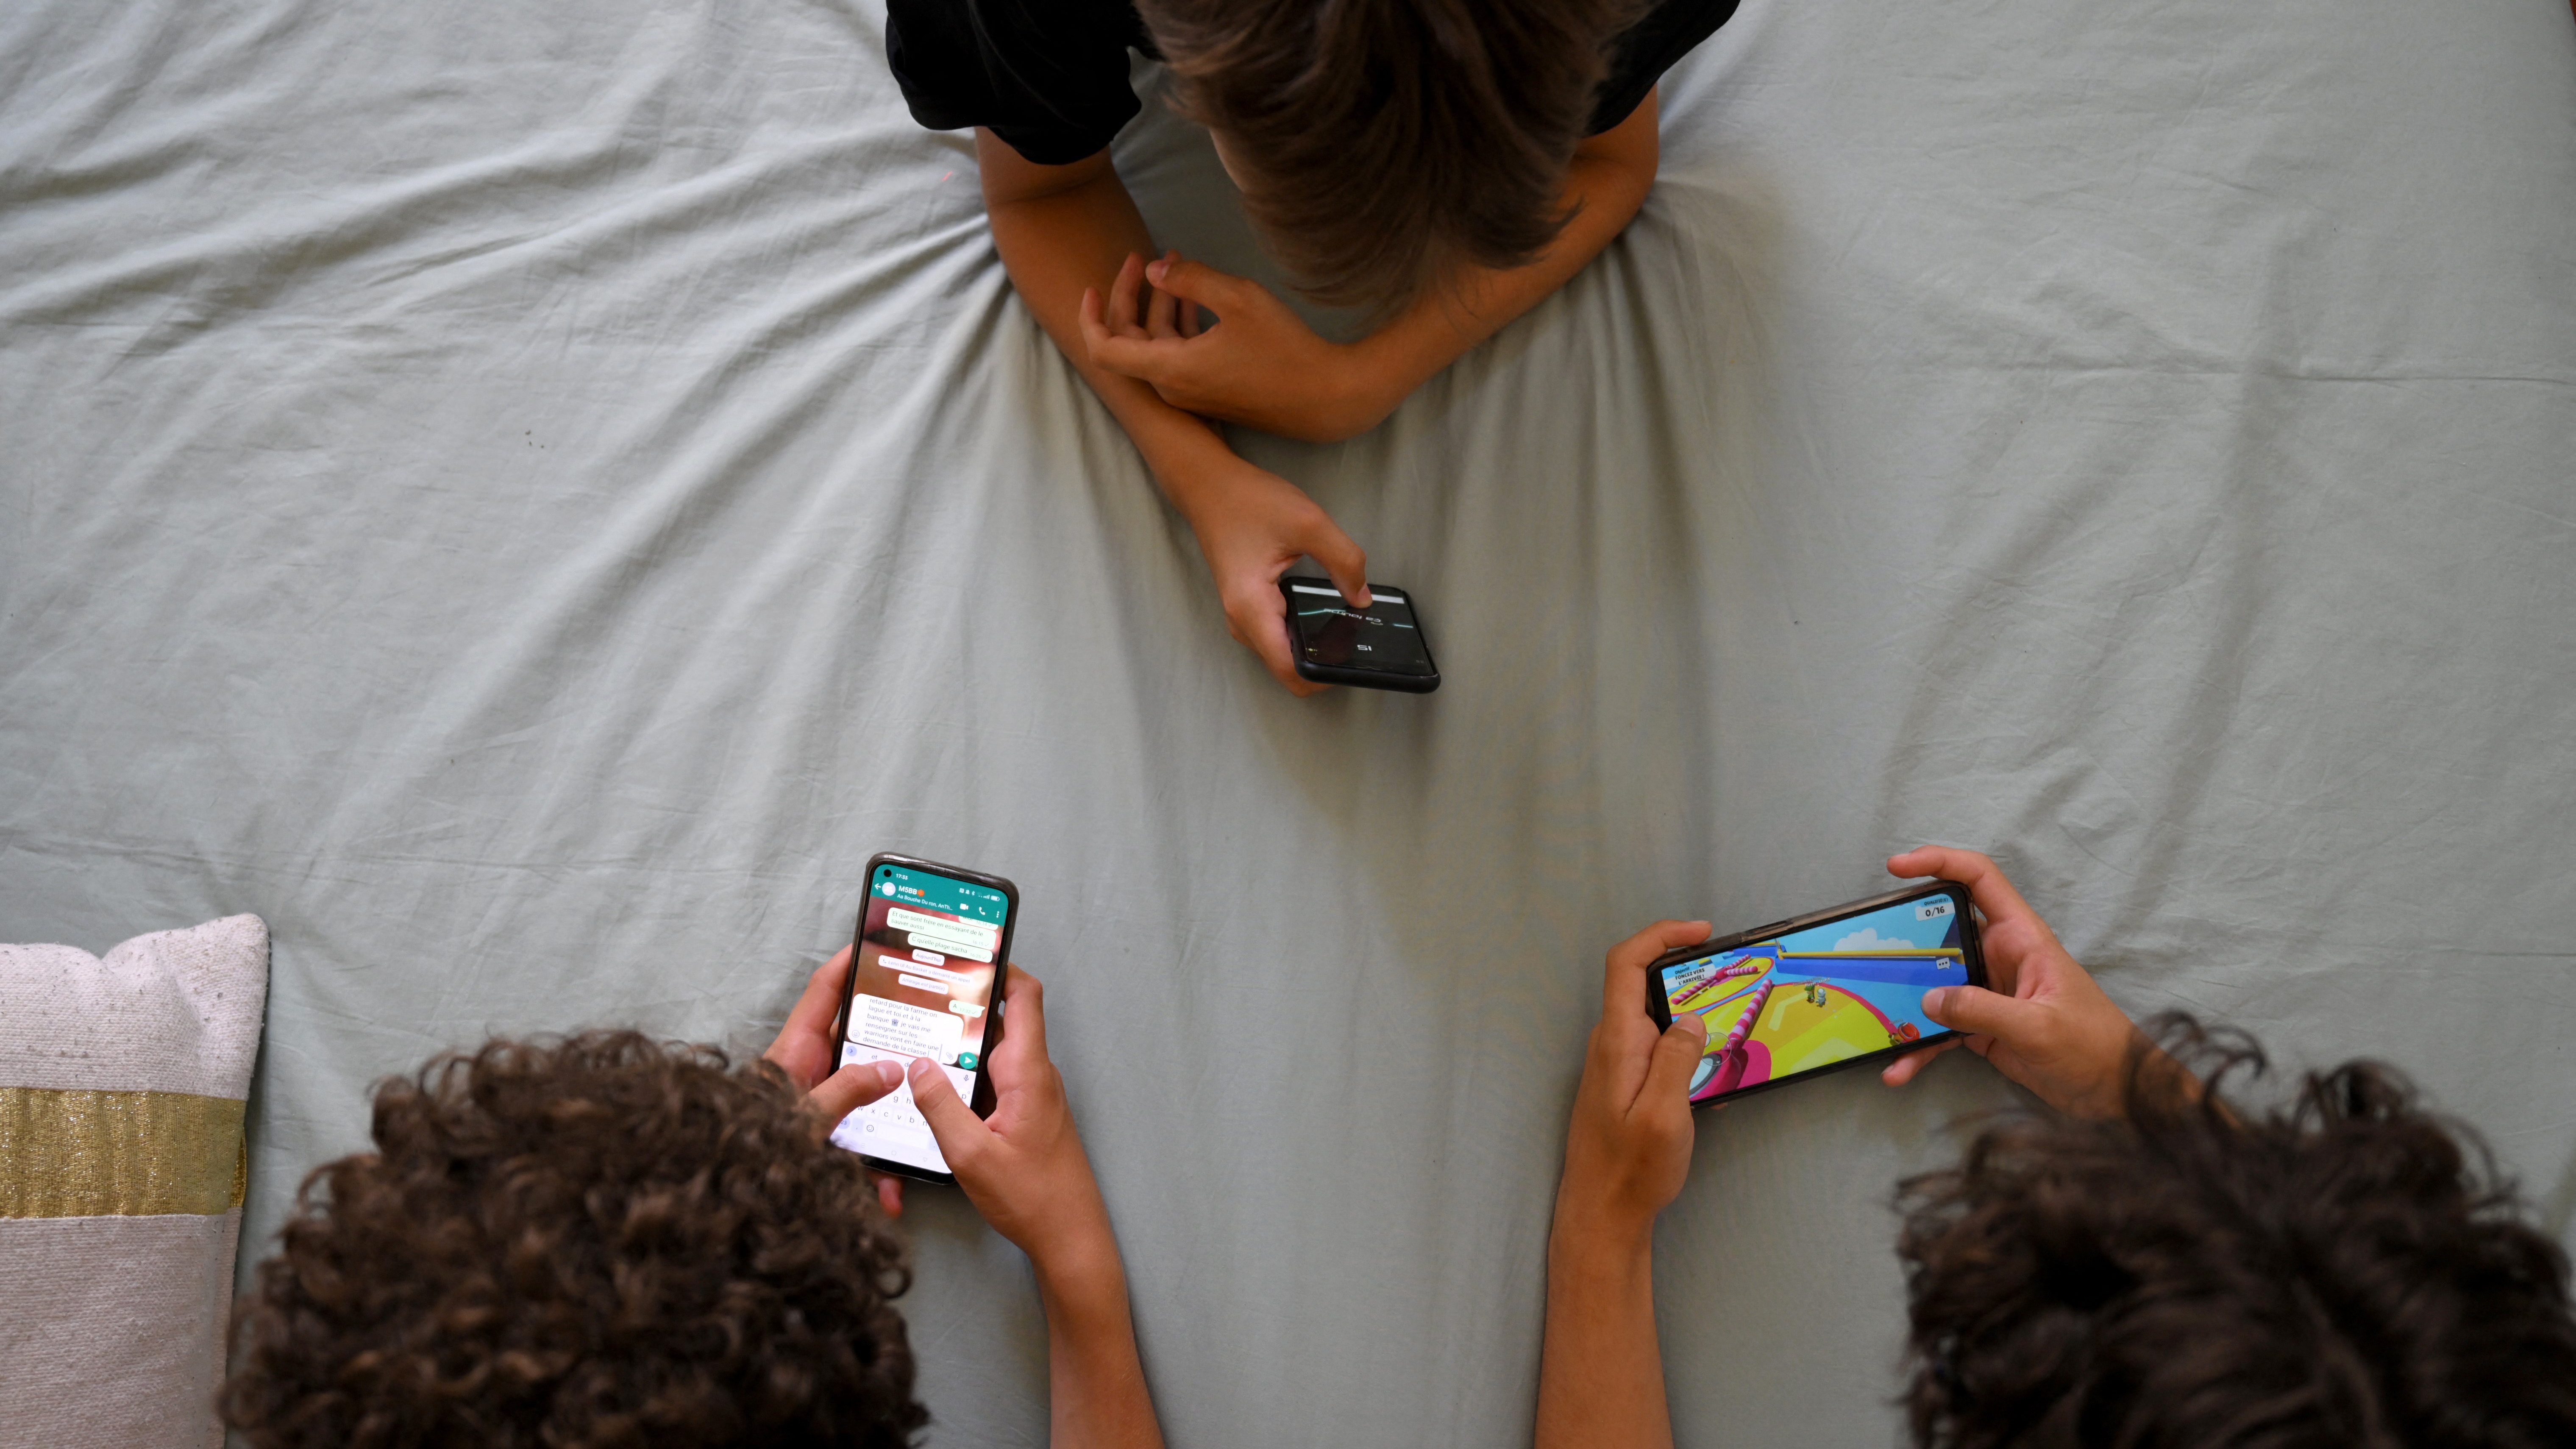 Tweens, Teens, and Phones: What Our 2019 Research Reveals